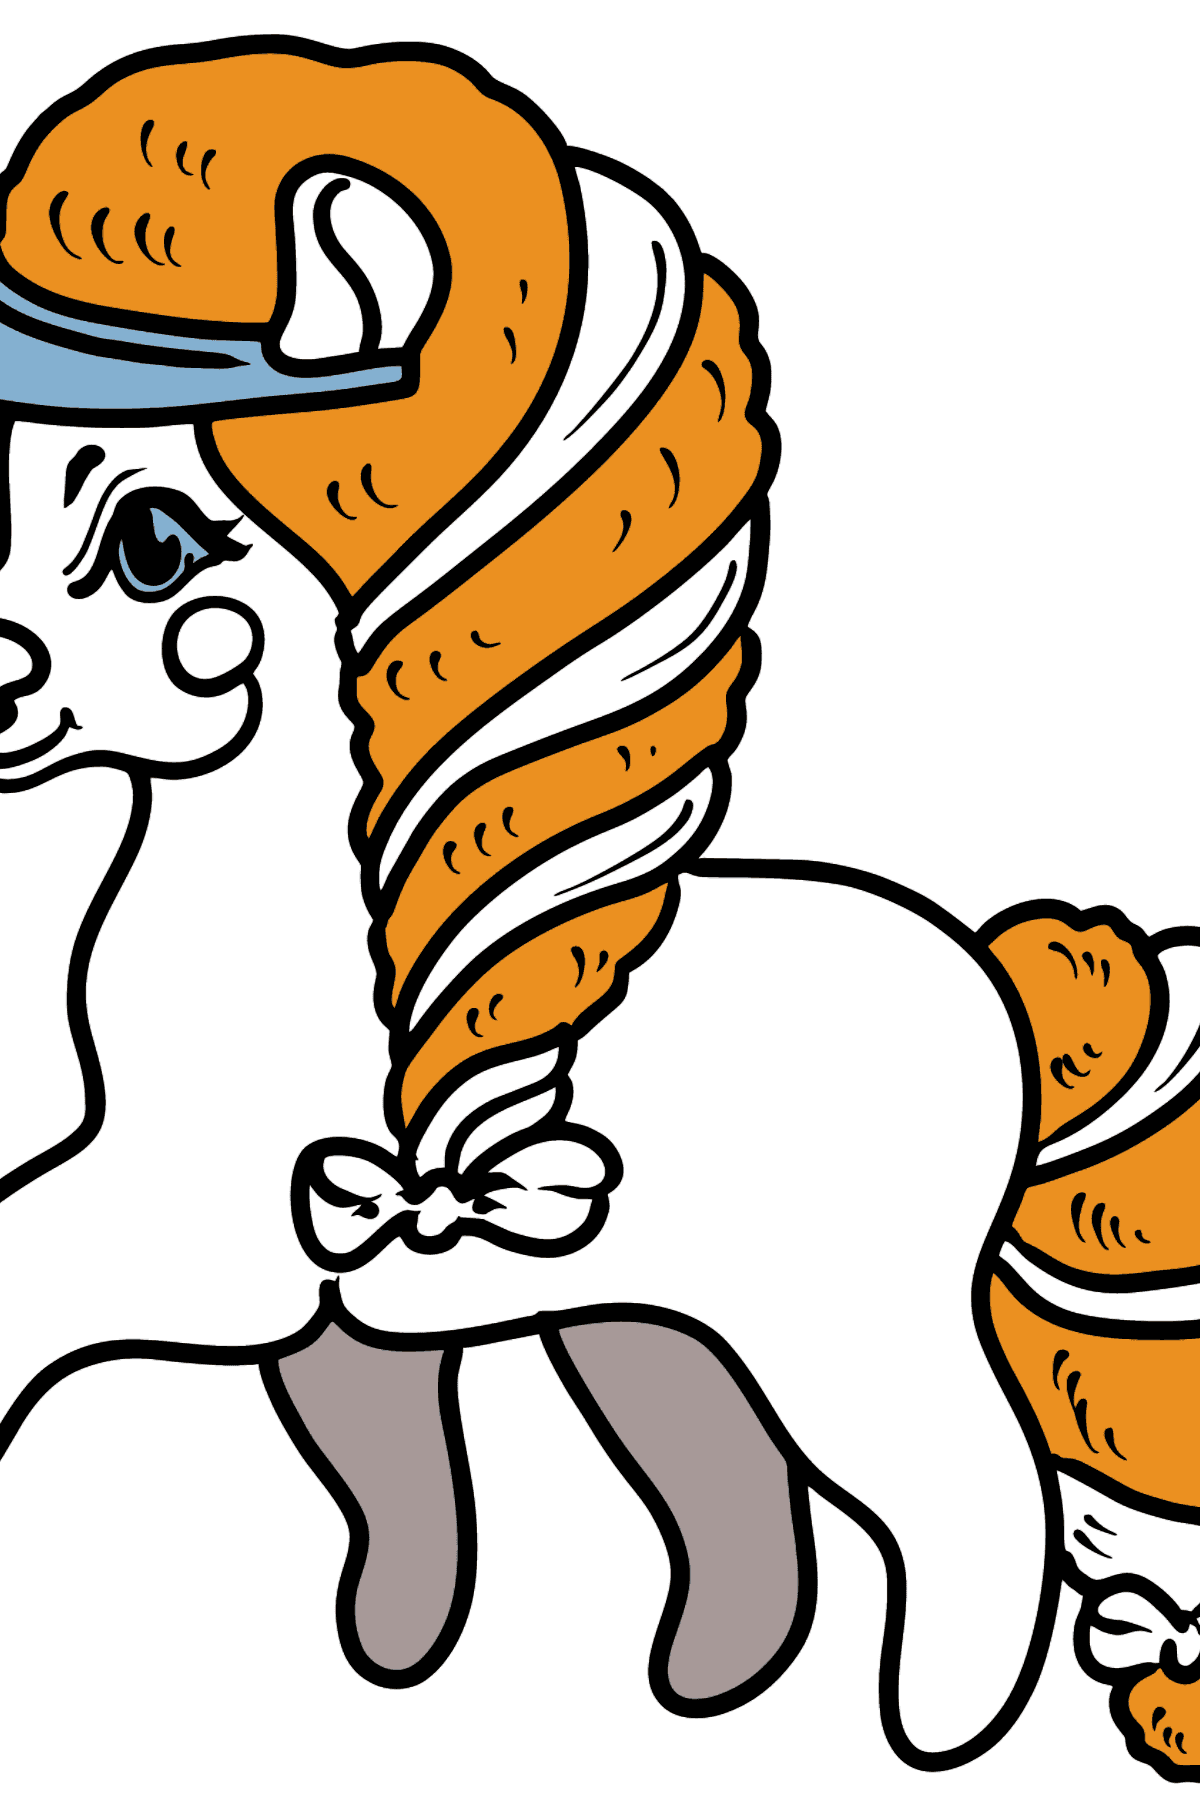 Pony Fashionista coloring page - Coloring Pages for Kids